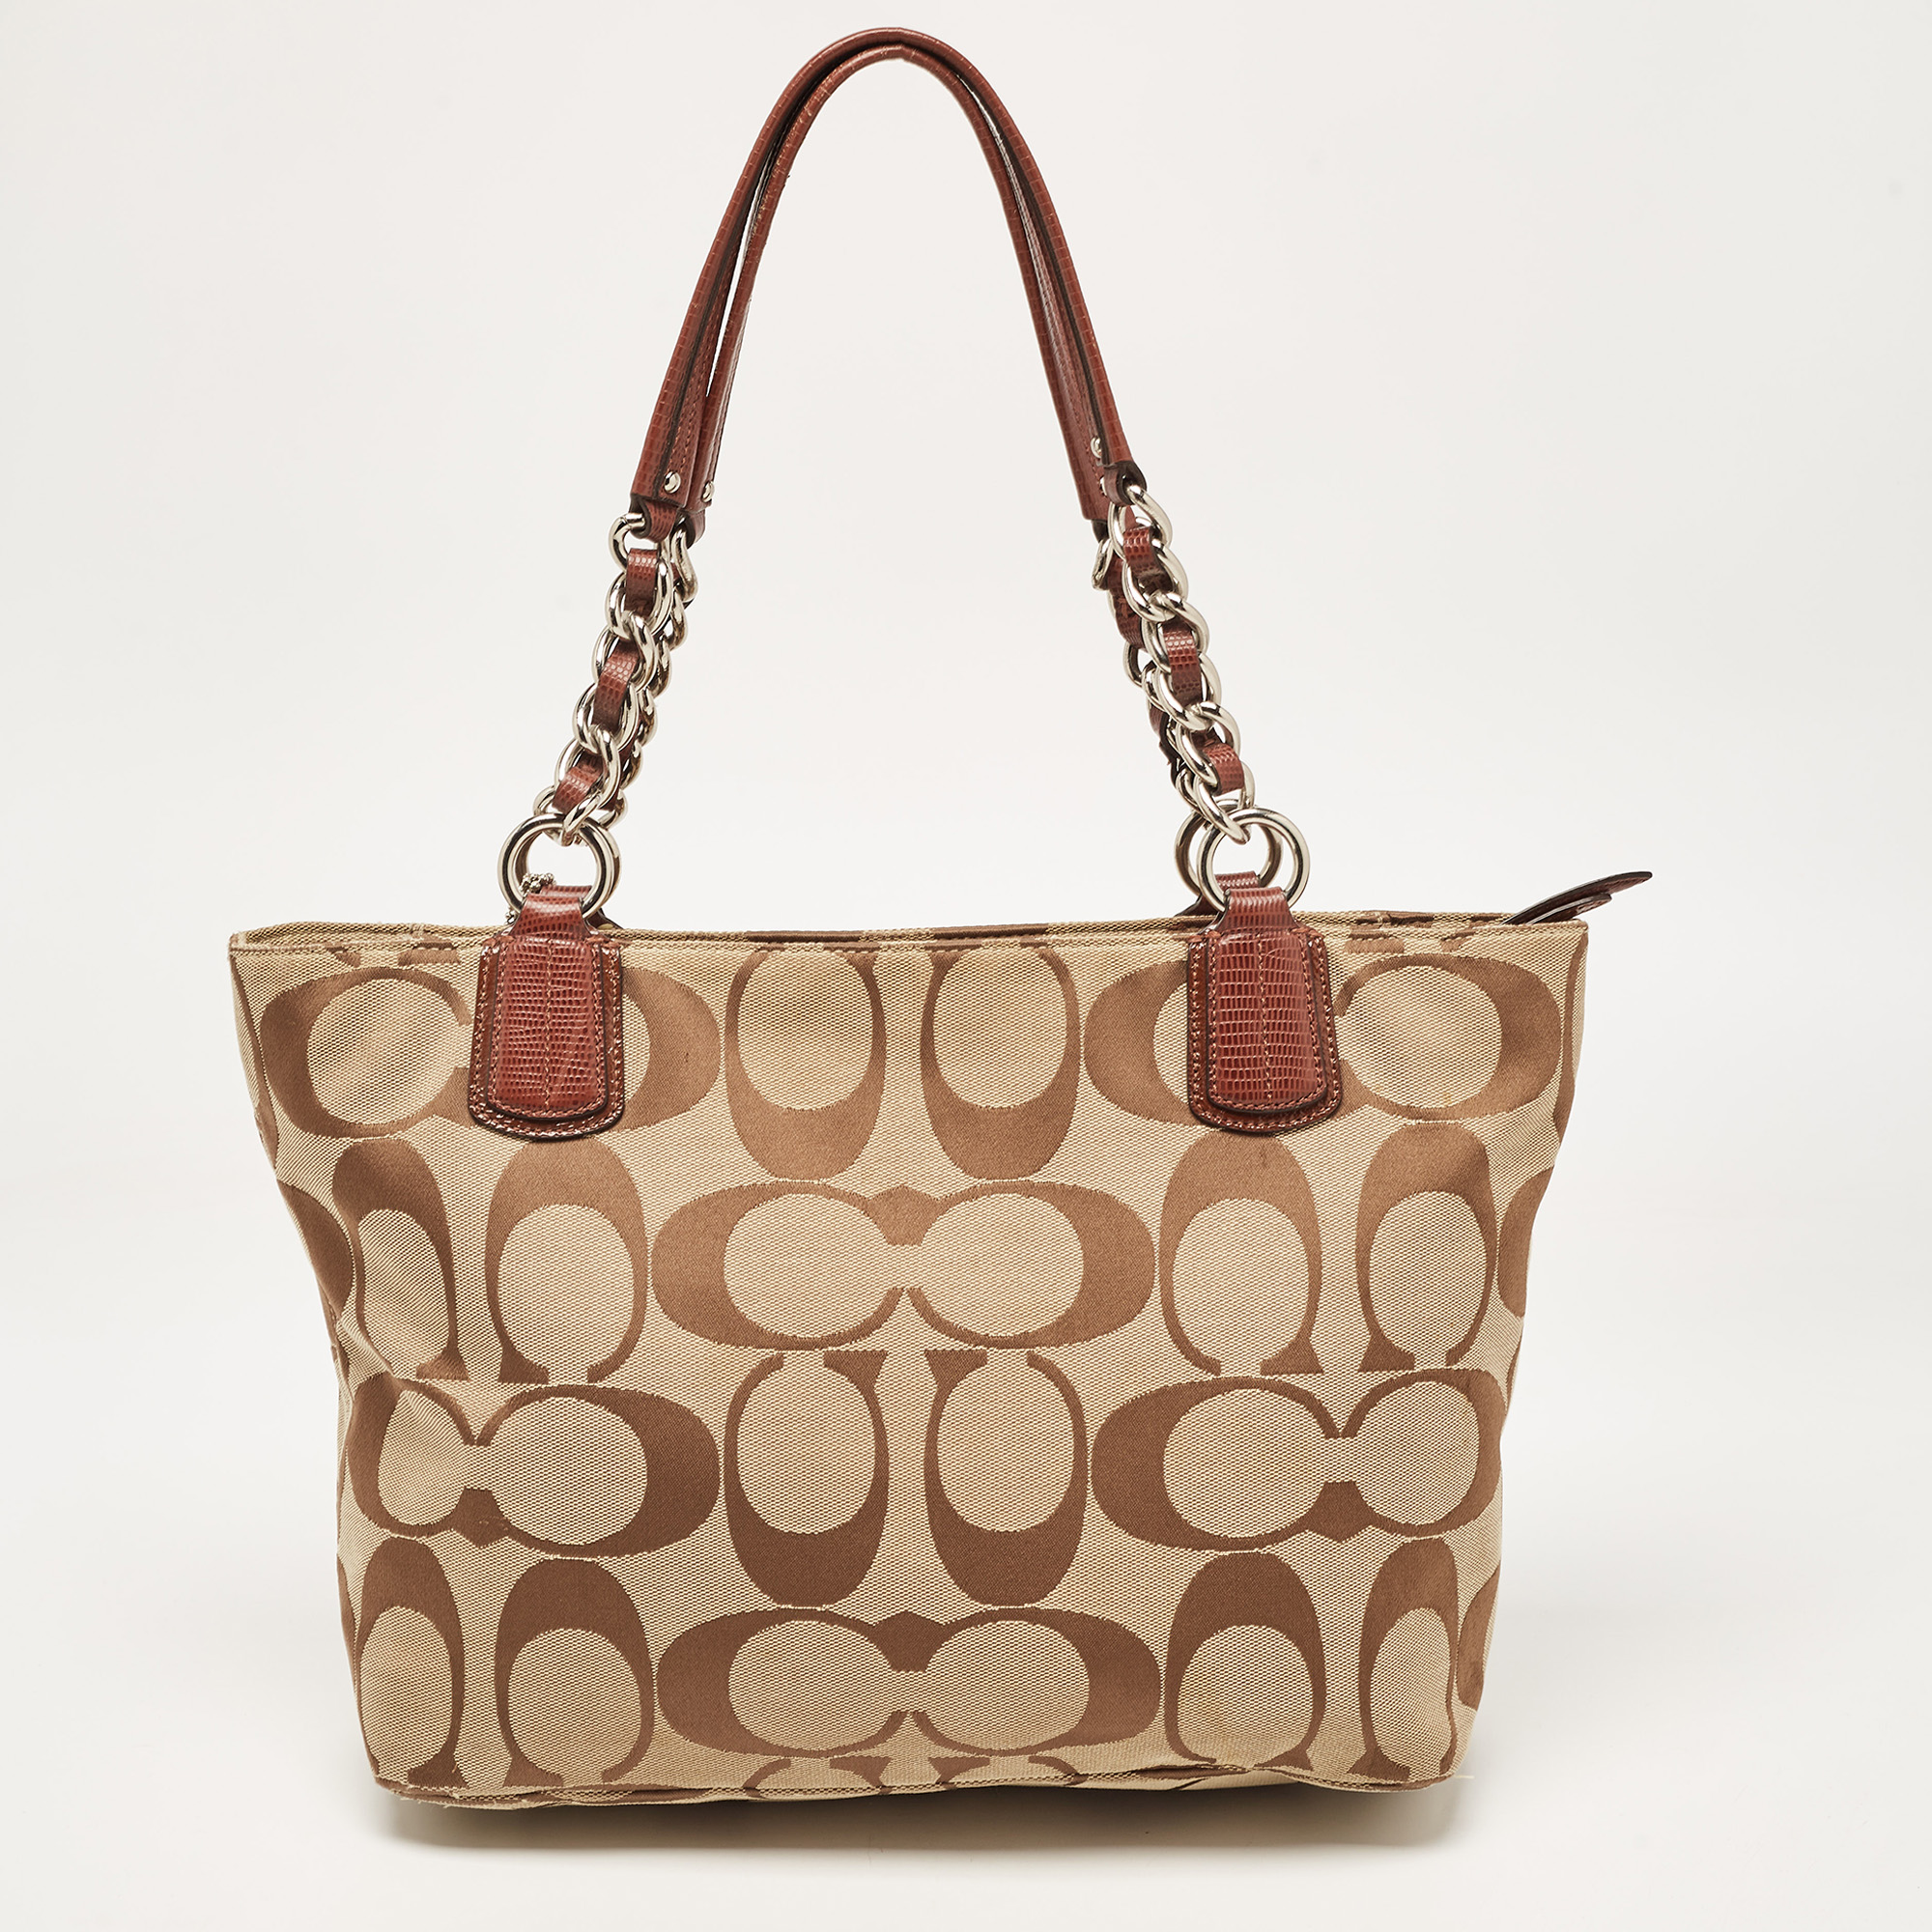 Coach Brown/Beige Signature Canvas And Leather Chain Tote